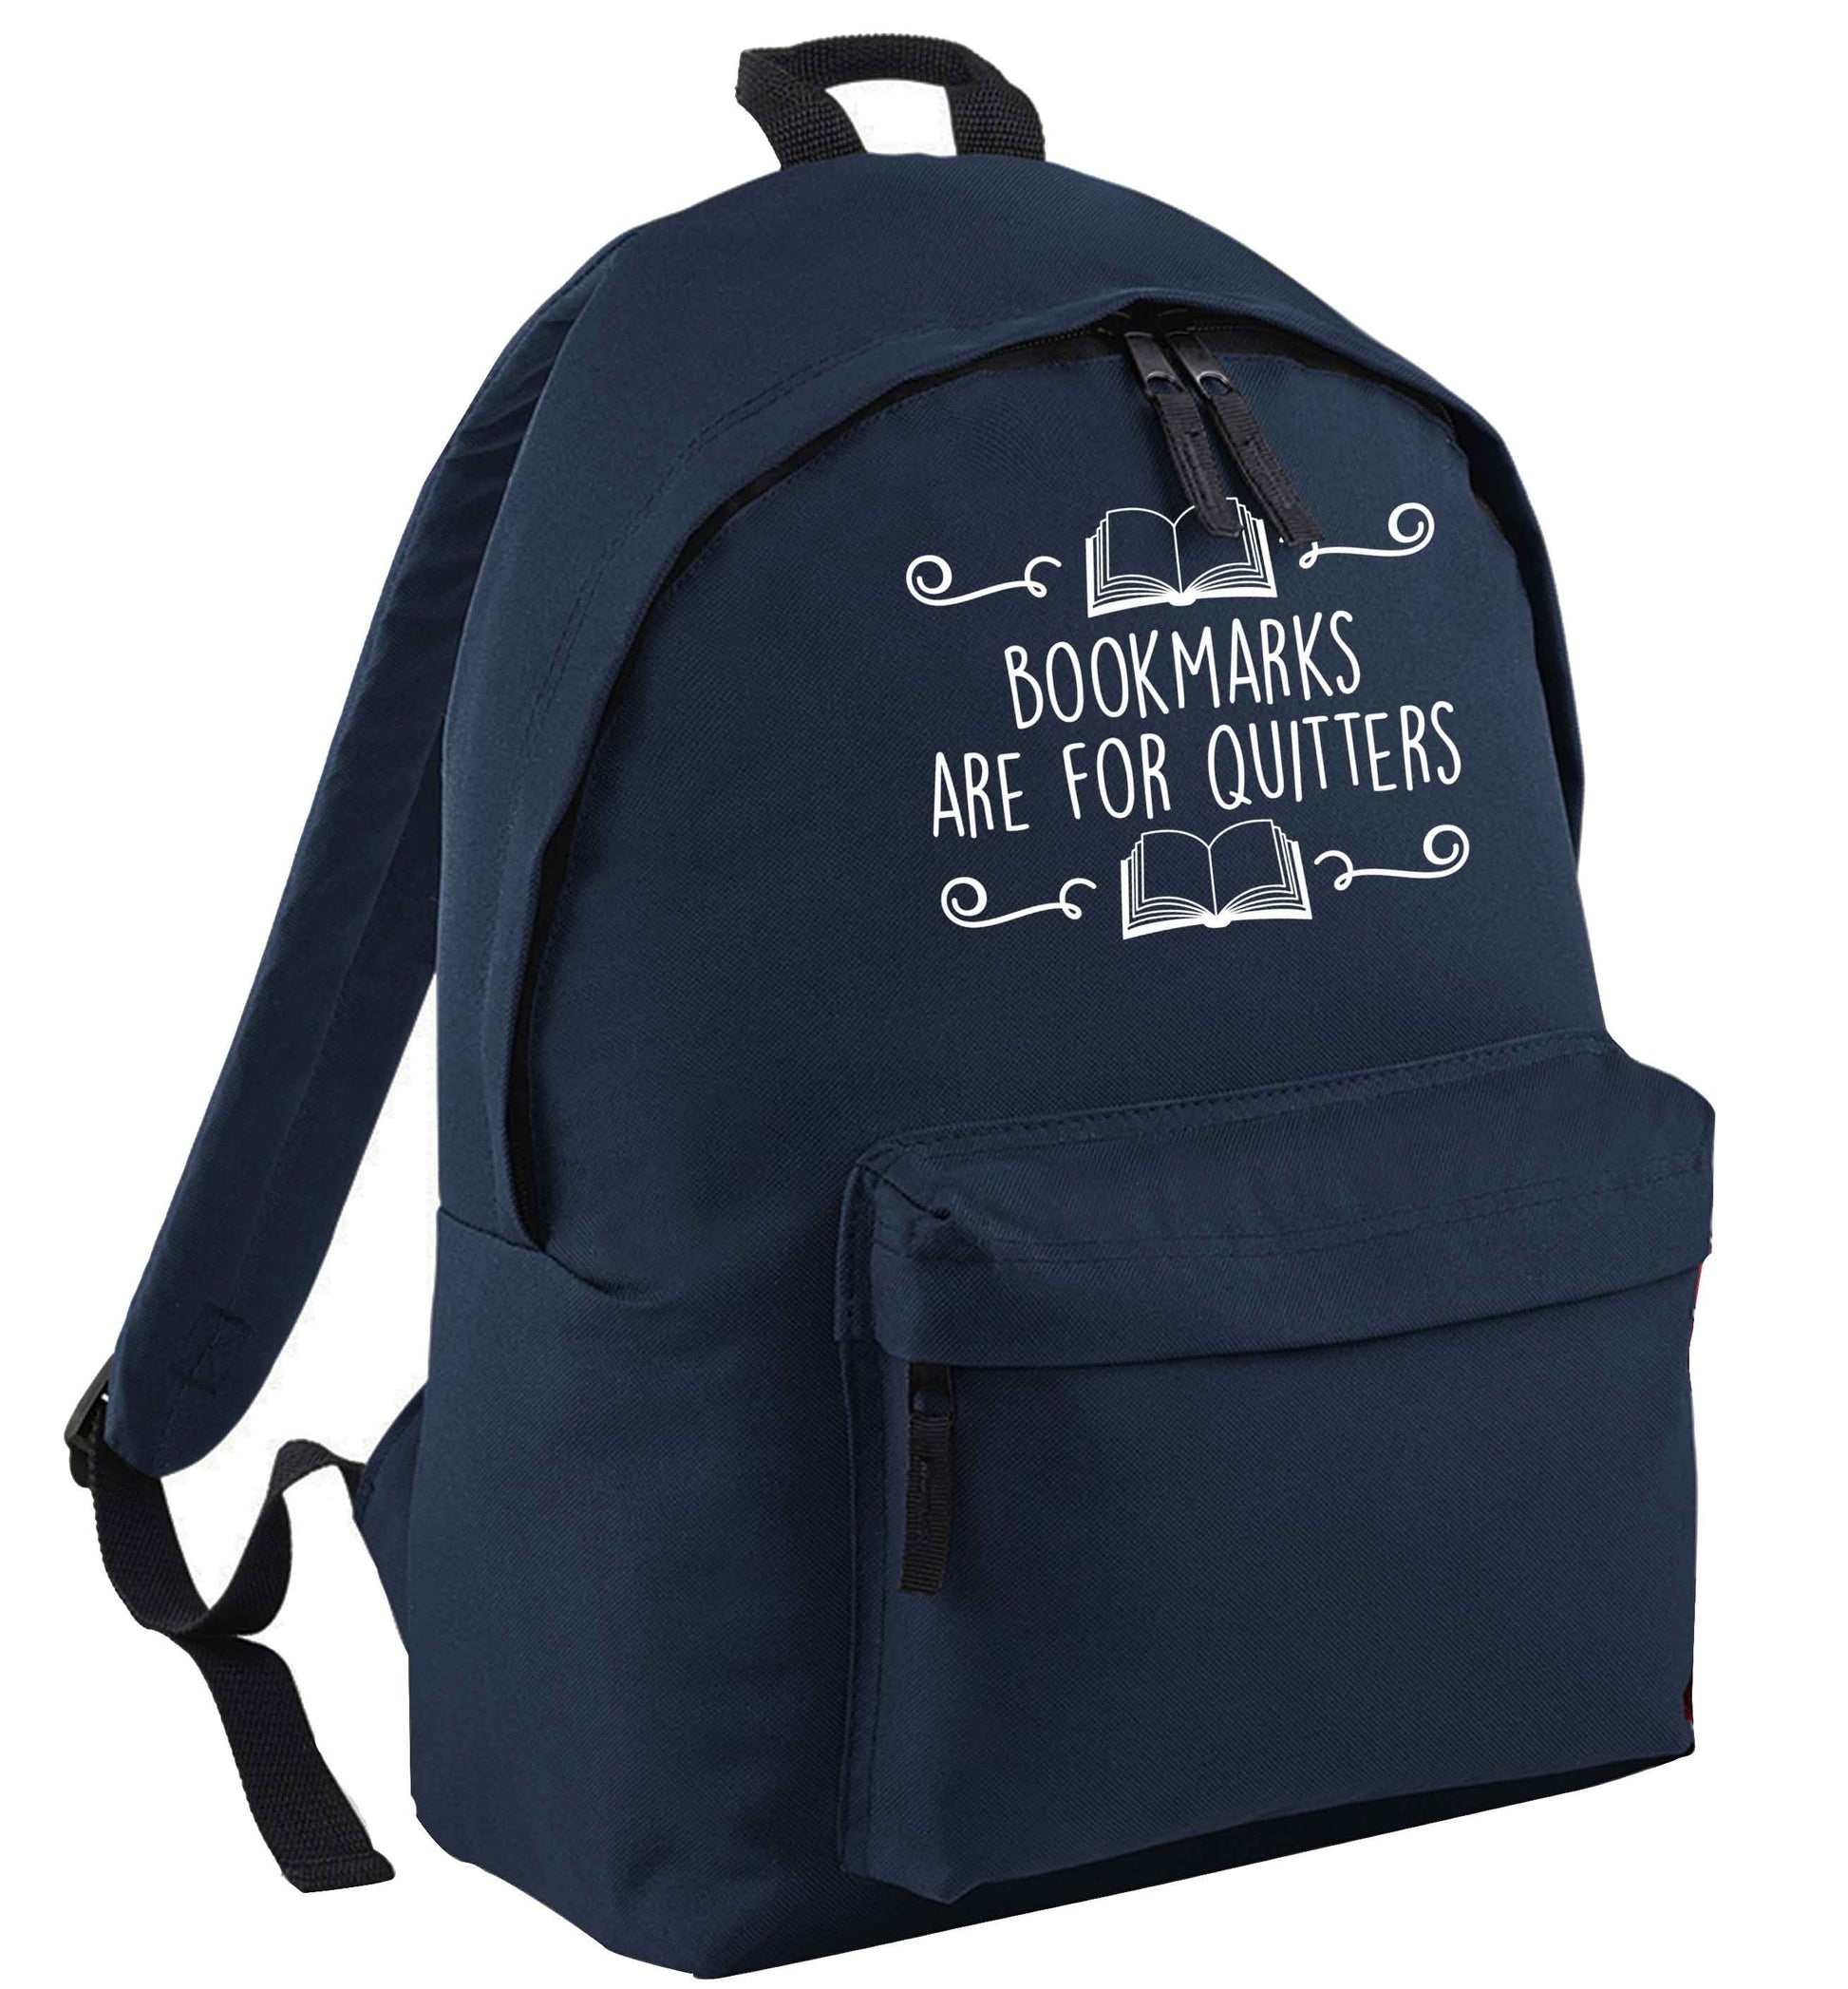 Bookmarks are for quitters navy adults backpack